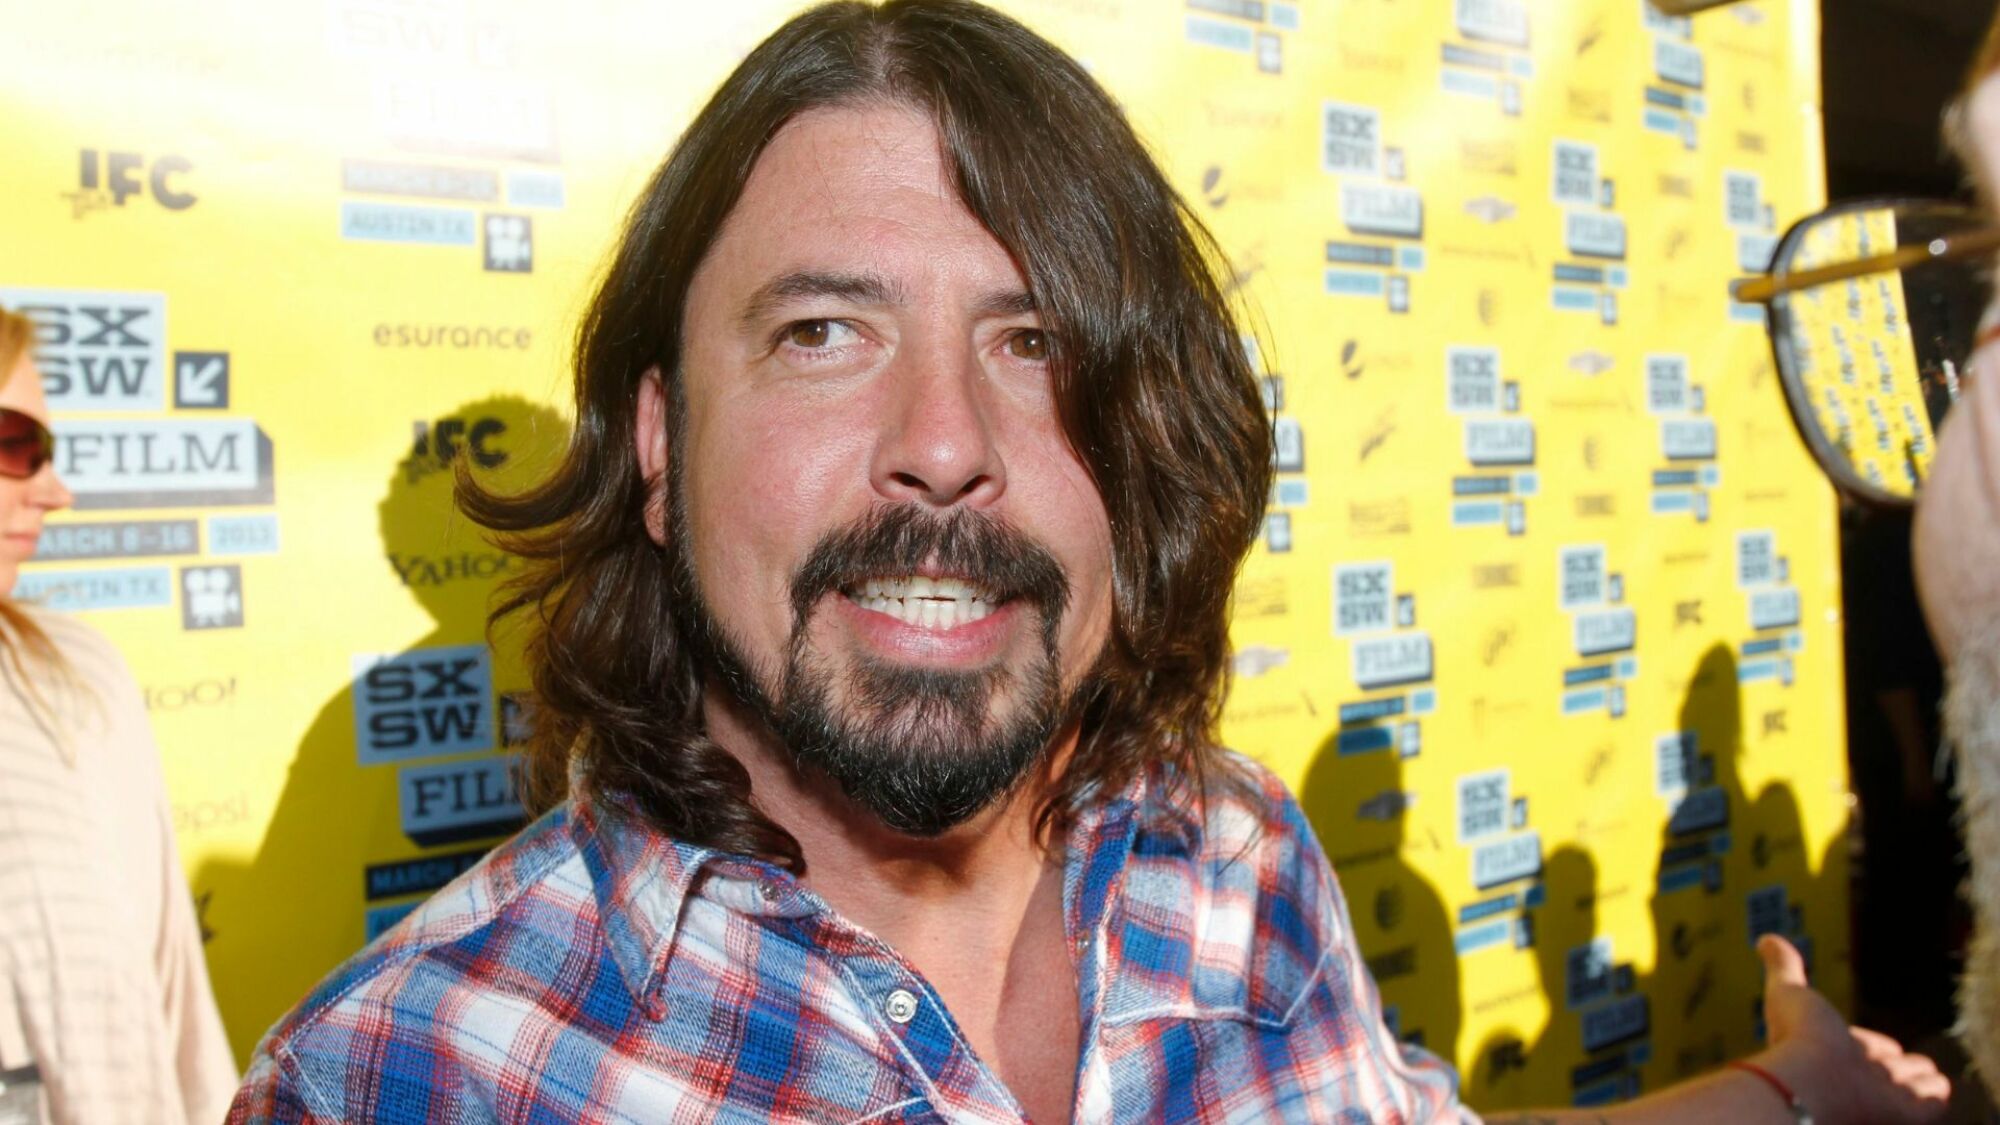 Dave Grohl arrives at a screening of his movie "Sound City" during the SXSW Film and Music Festival, on in Austin, Texas SXSW 2013 